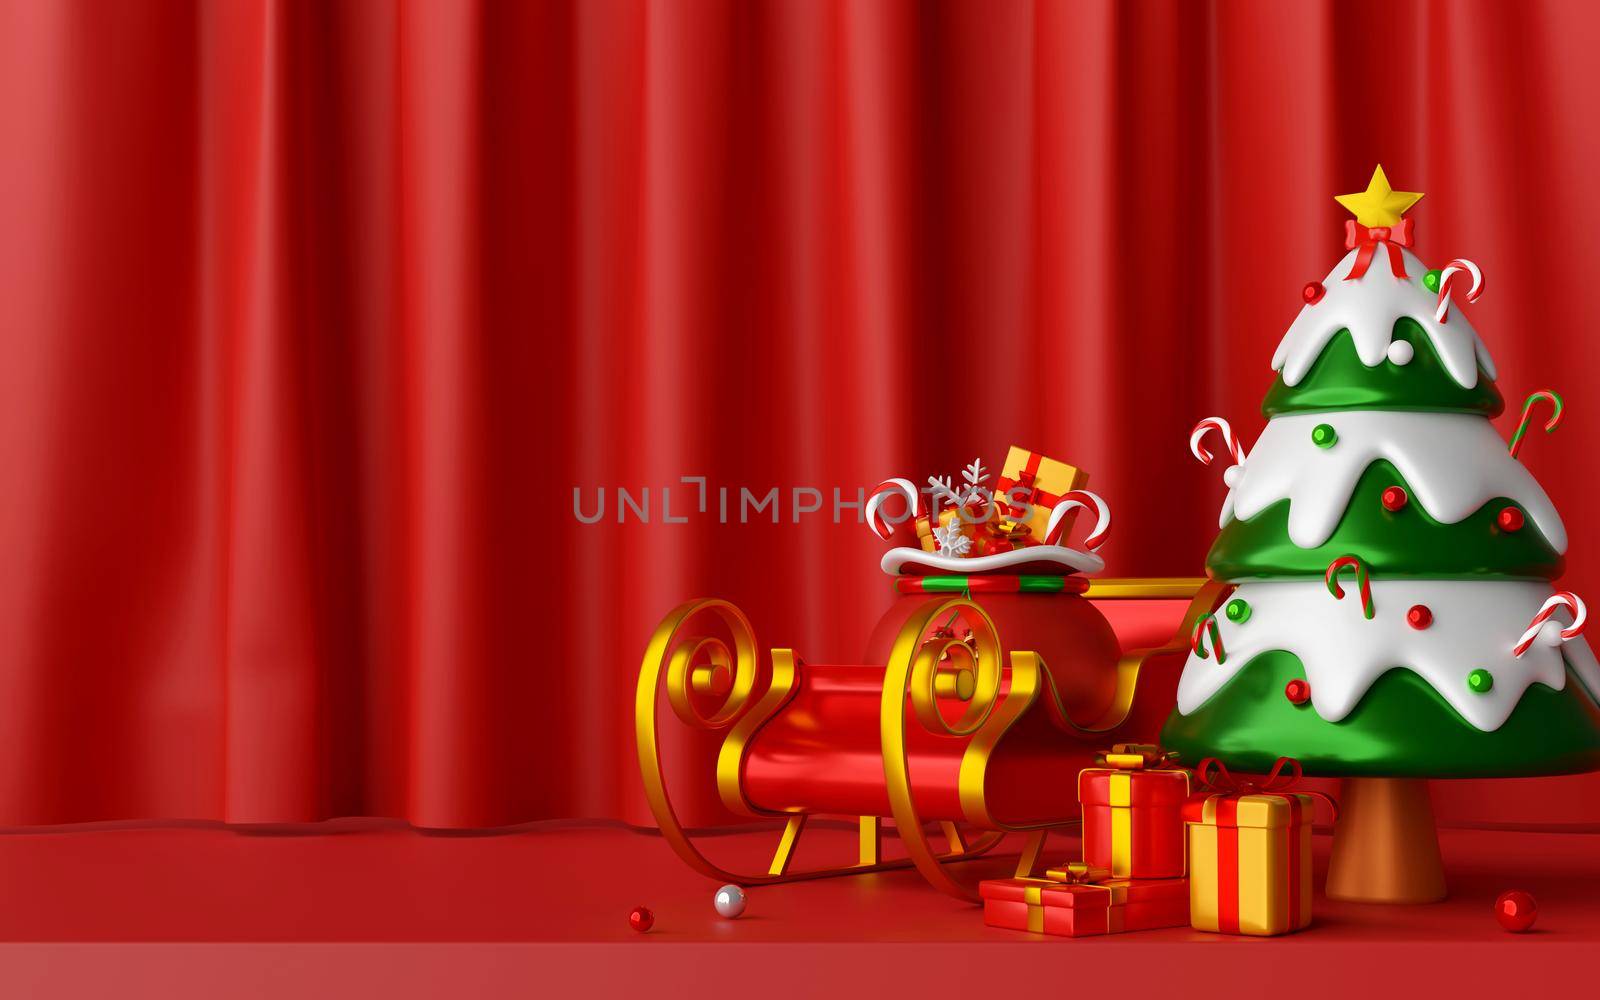 Christmas postcard of Christmas tree and sleigh on red curtain background, 3d illustration by nutzchotwarut